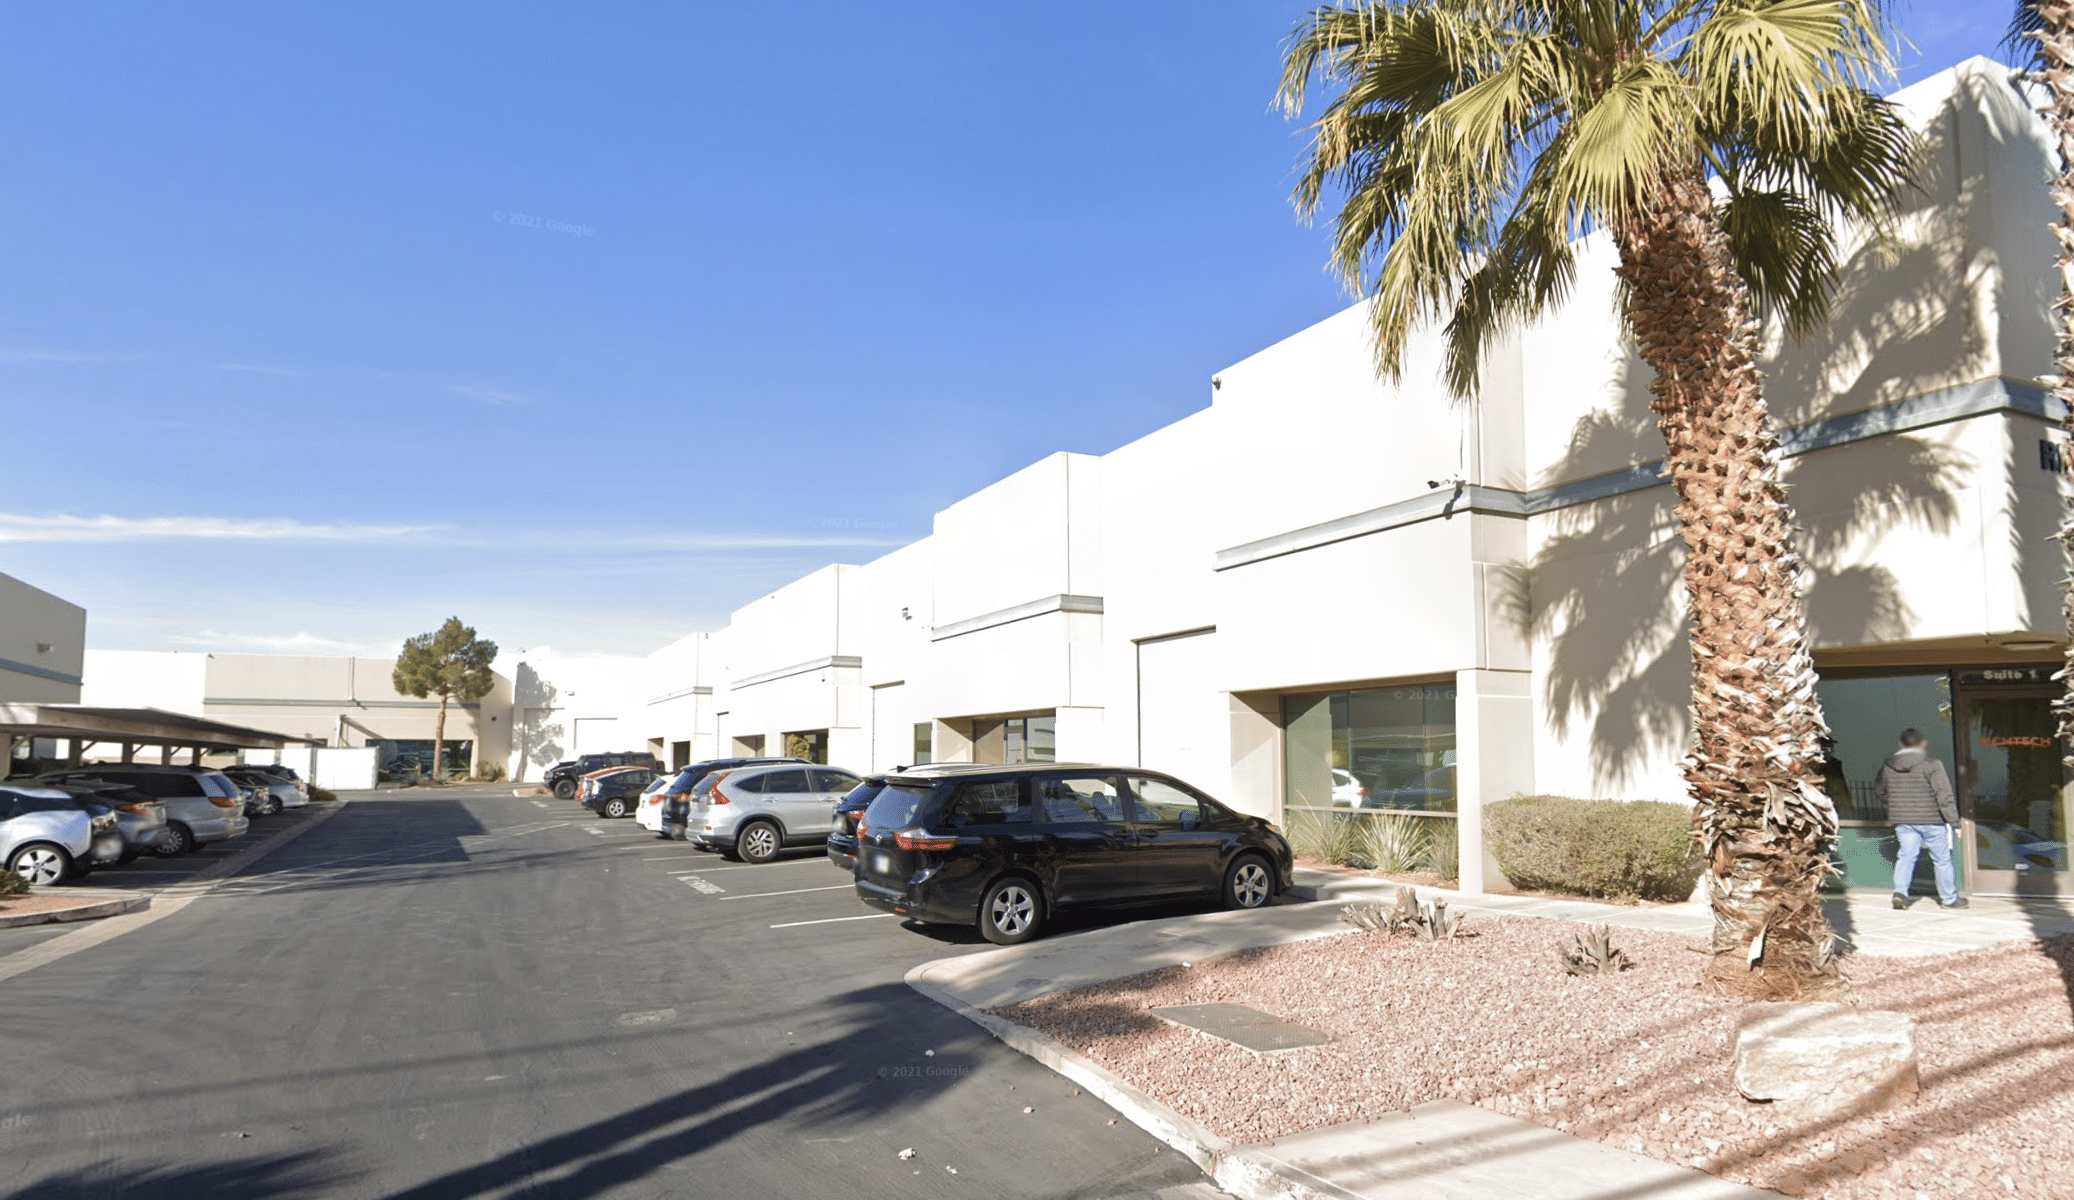 West Cameron Industrial ParkWe developed and constructed approximately 40,075 square feet of office and warehouse space located in close proximity to the Strip in central Las Vegas.